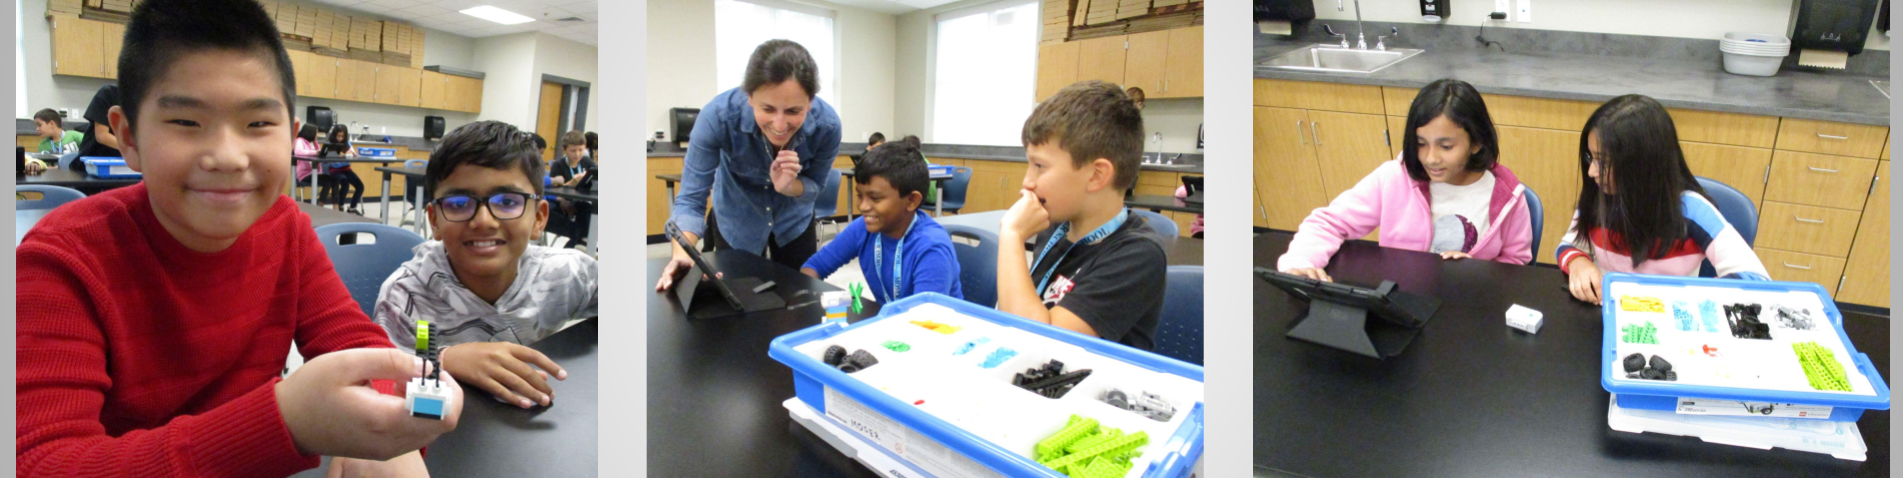 Students at Moser school participate in Lego STEAM activities